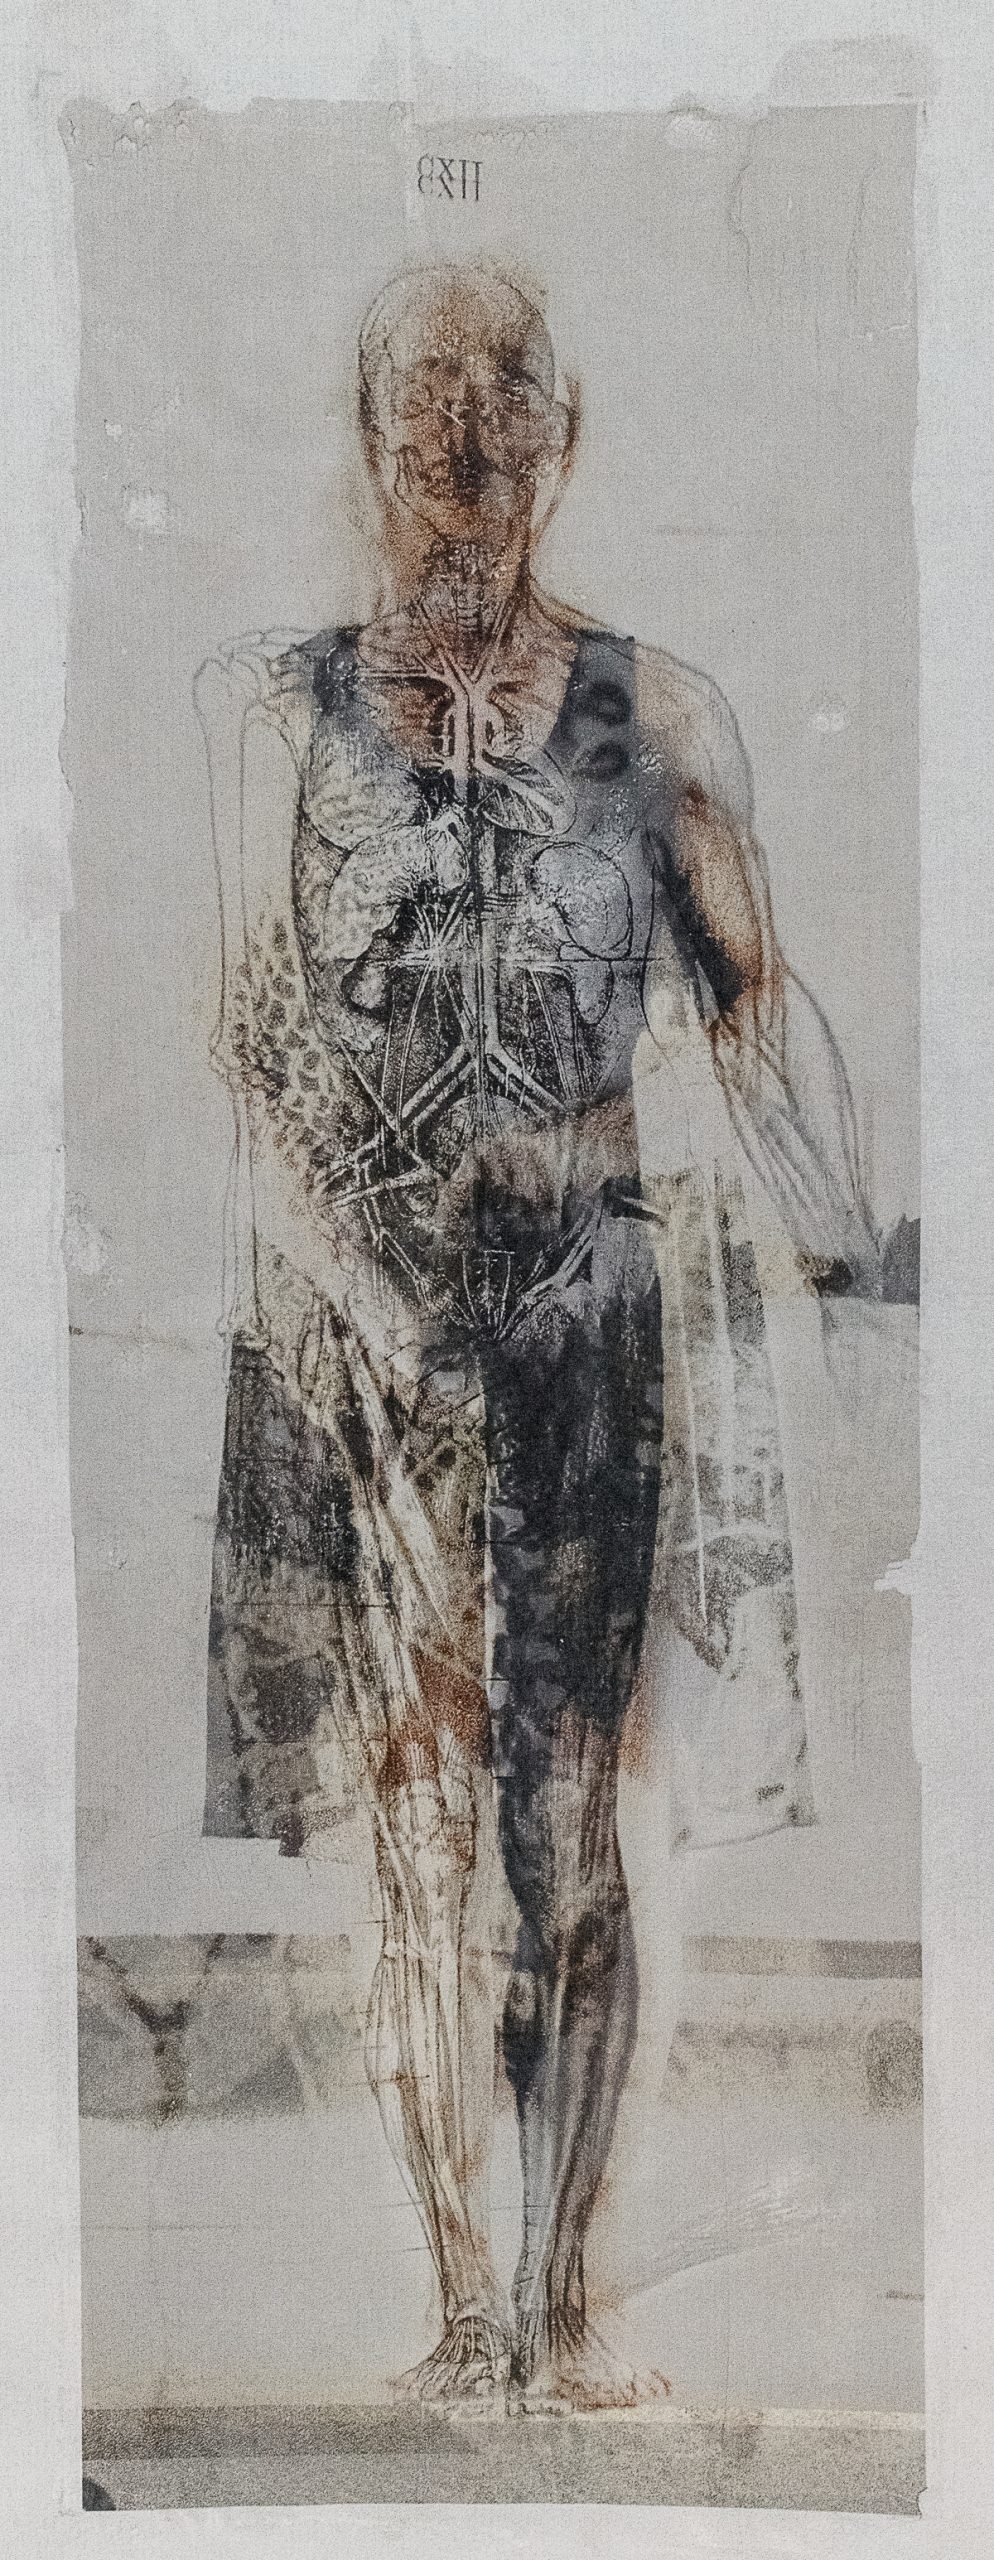     Peggy Taylor Reid, Internal Workings, 2019. Image transfer on washi paper.

